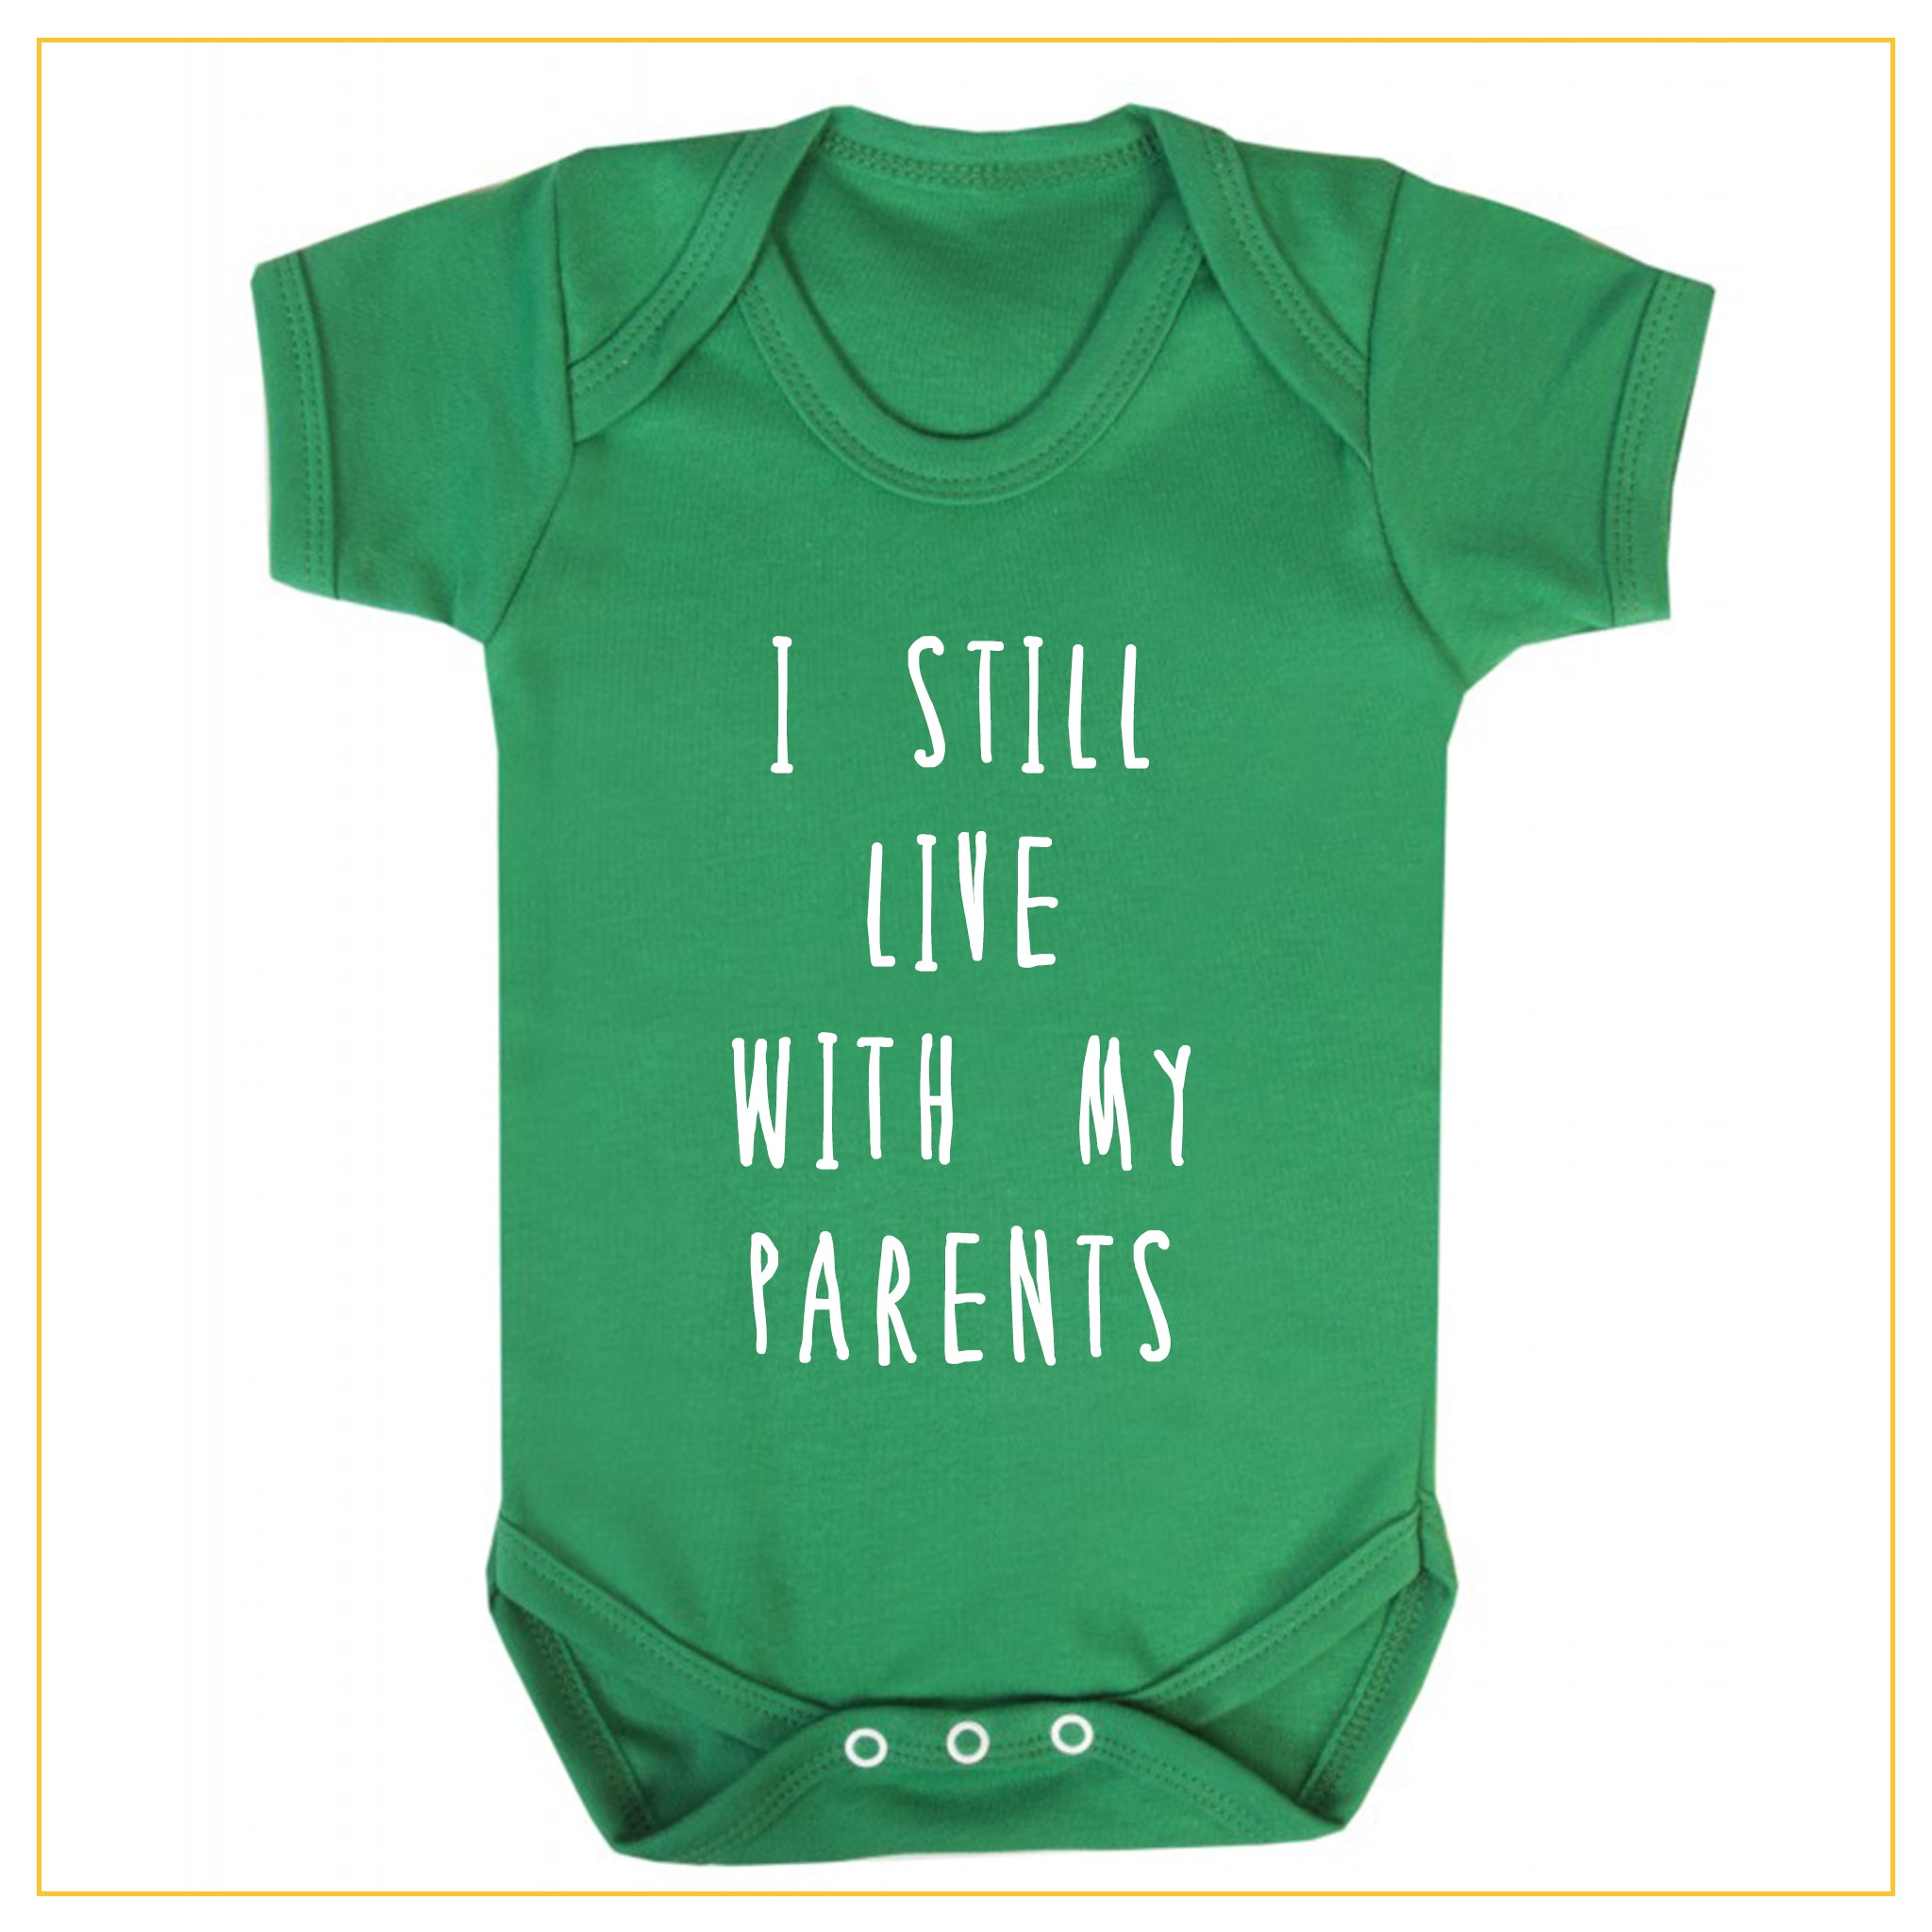 I still live with my parents baby onesie in green